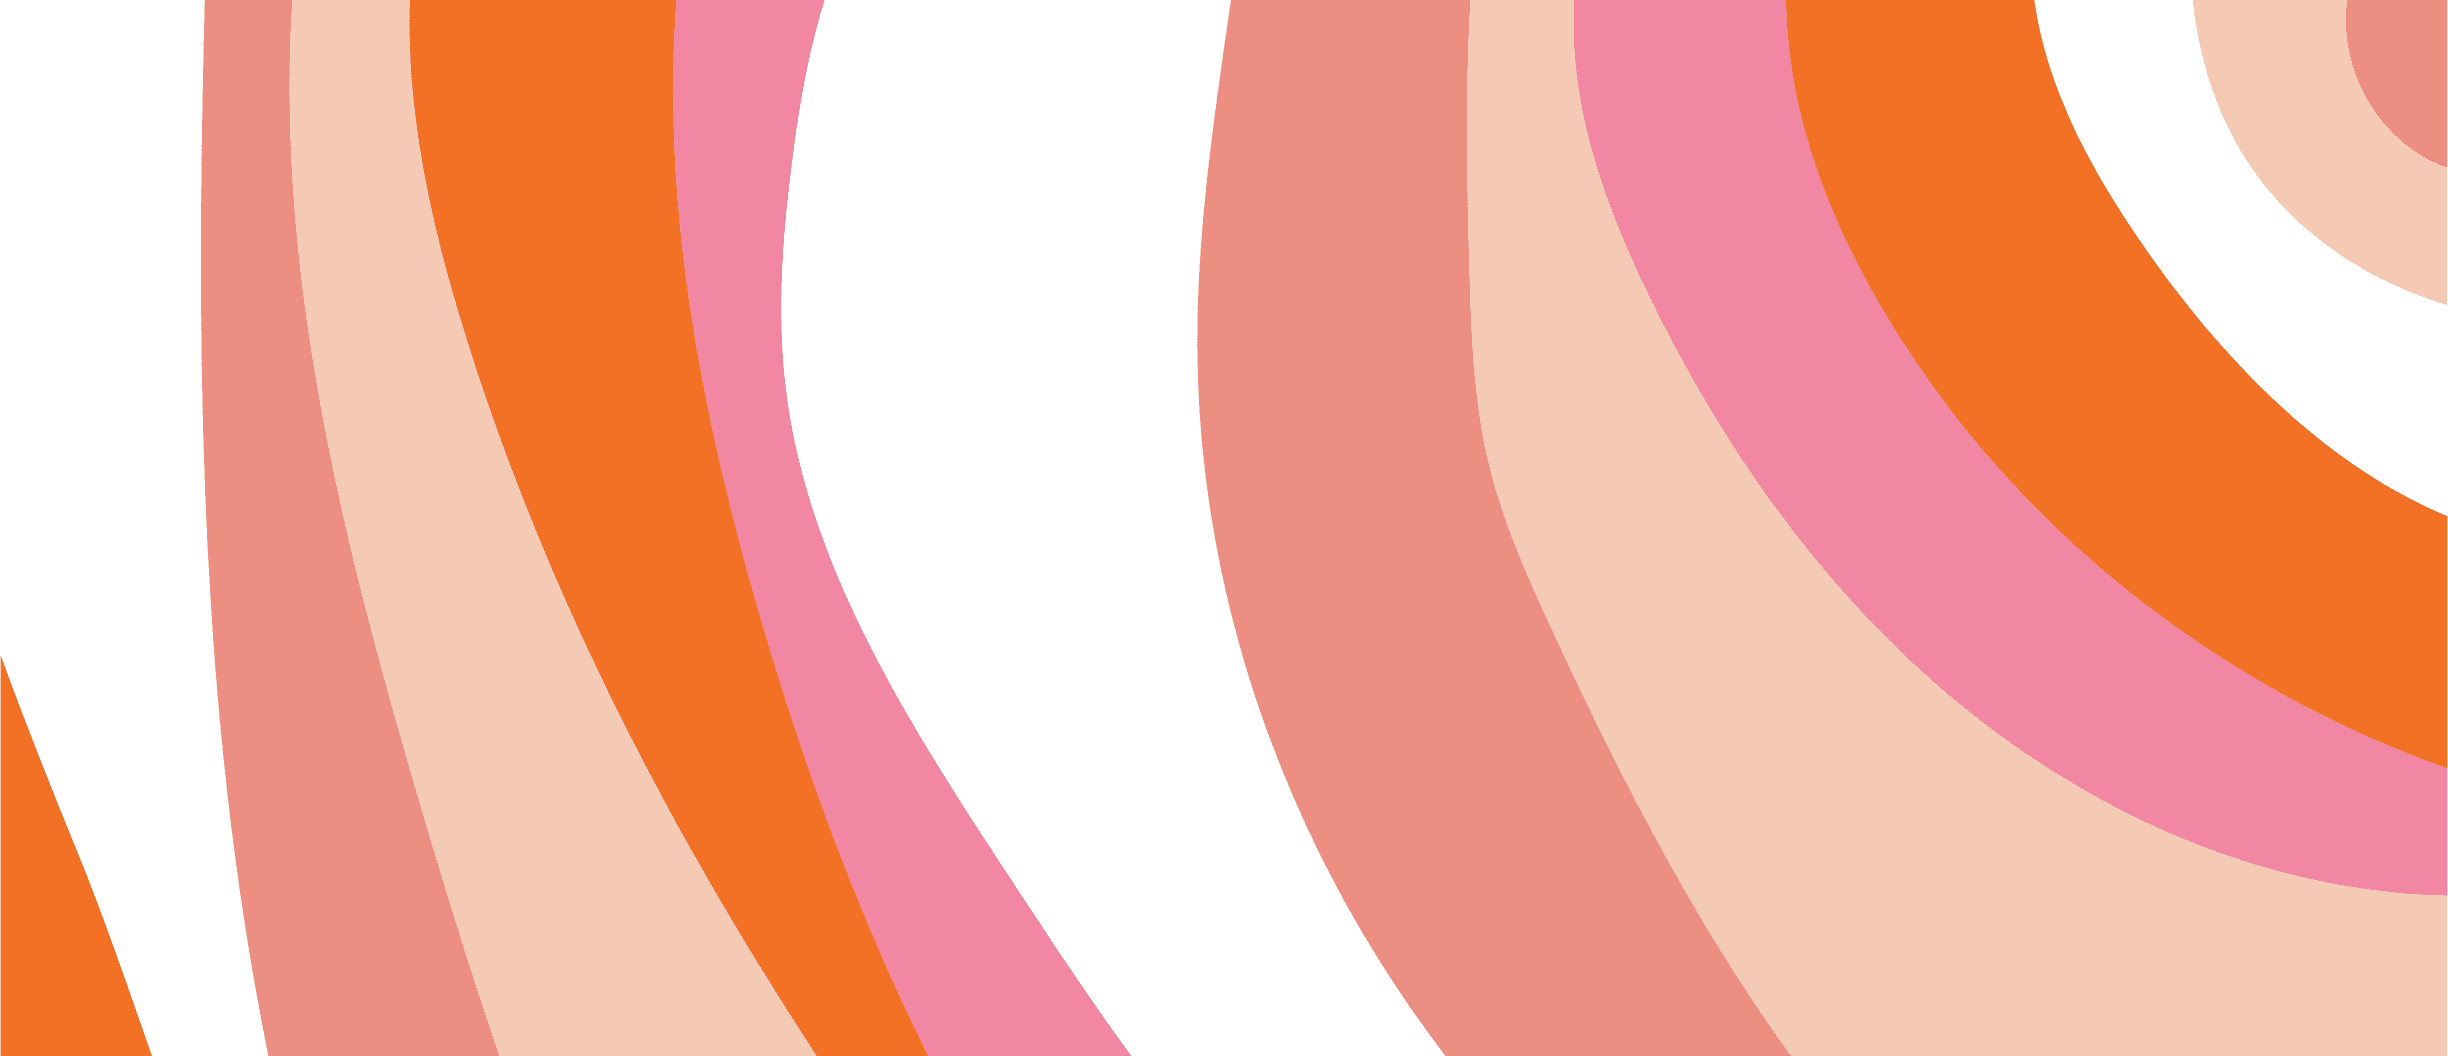 curved lines in pink, orange and white